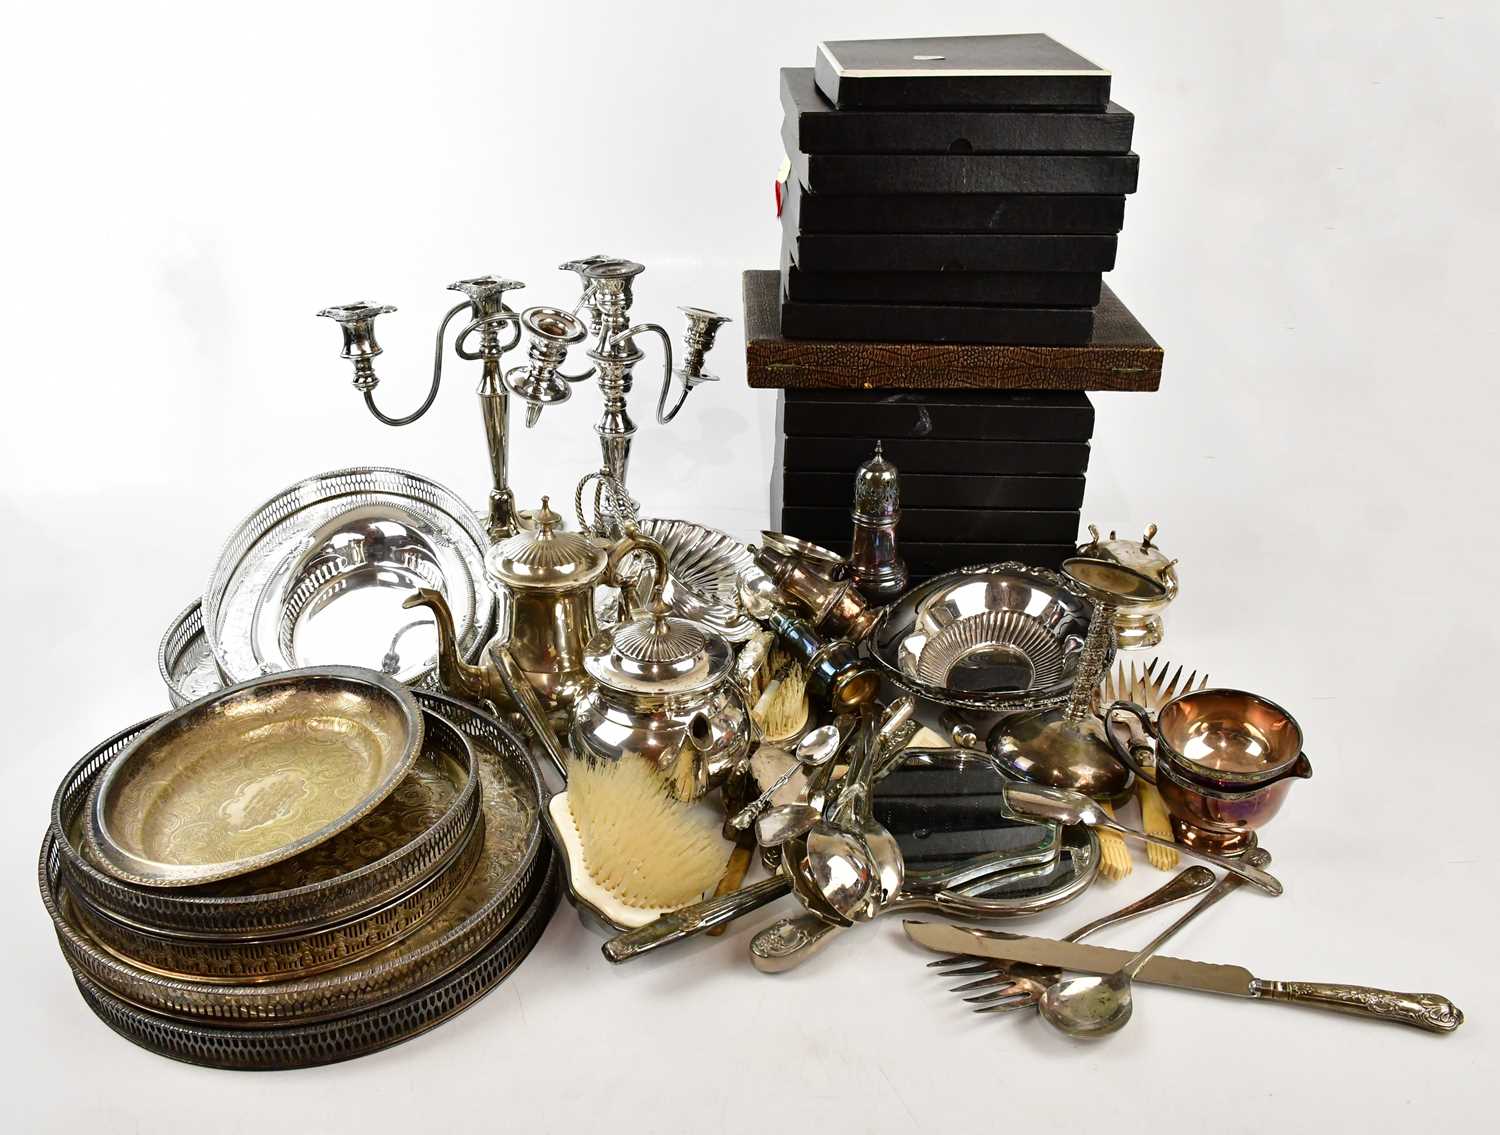 A large collection of silver plated items to include candlesticks, cutlery, trays, a teapot, a